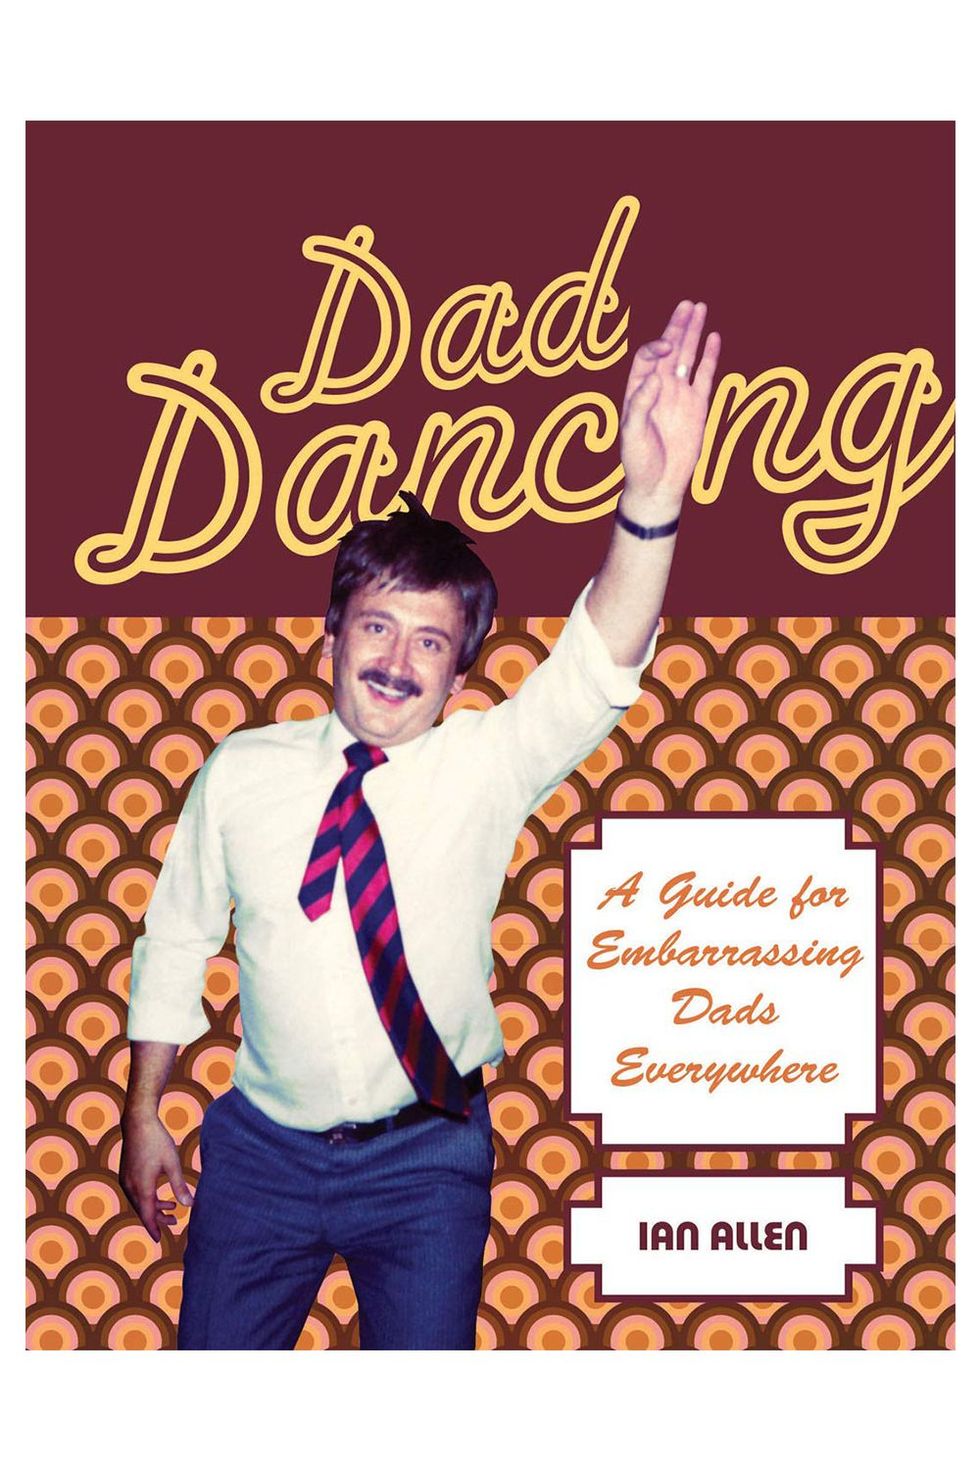 Dad Dancing: A Guide to Embarrassing Dads Everywhere